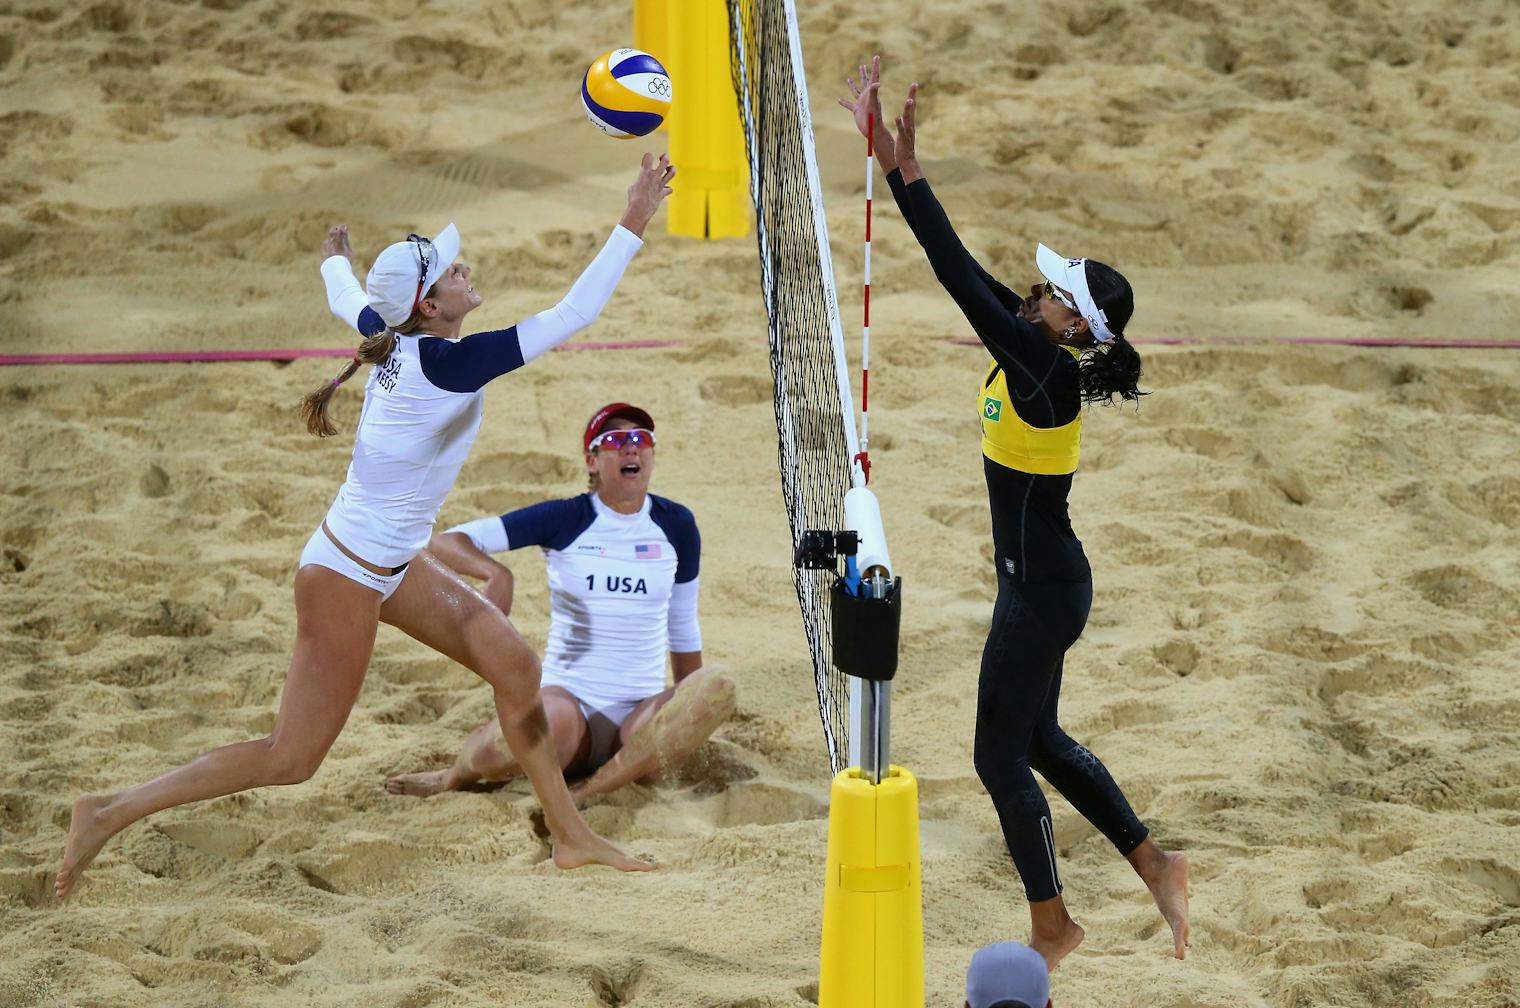 What Is The 2016 Olympic Beach Volleyball Dress Code? Here's How The